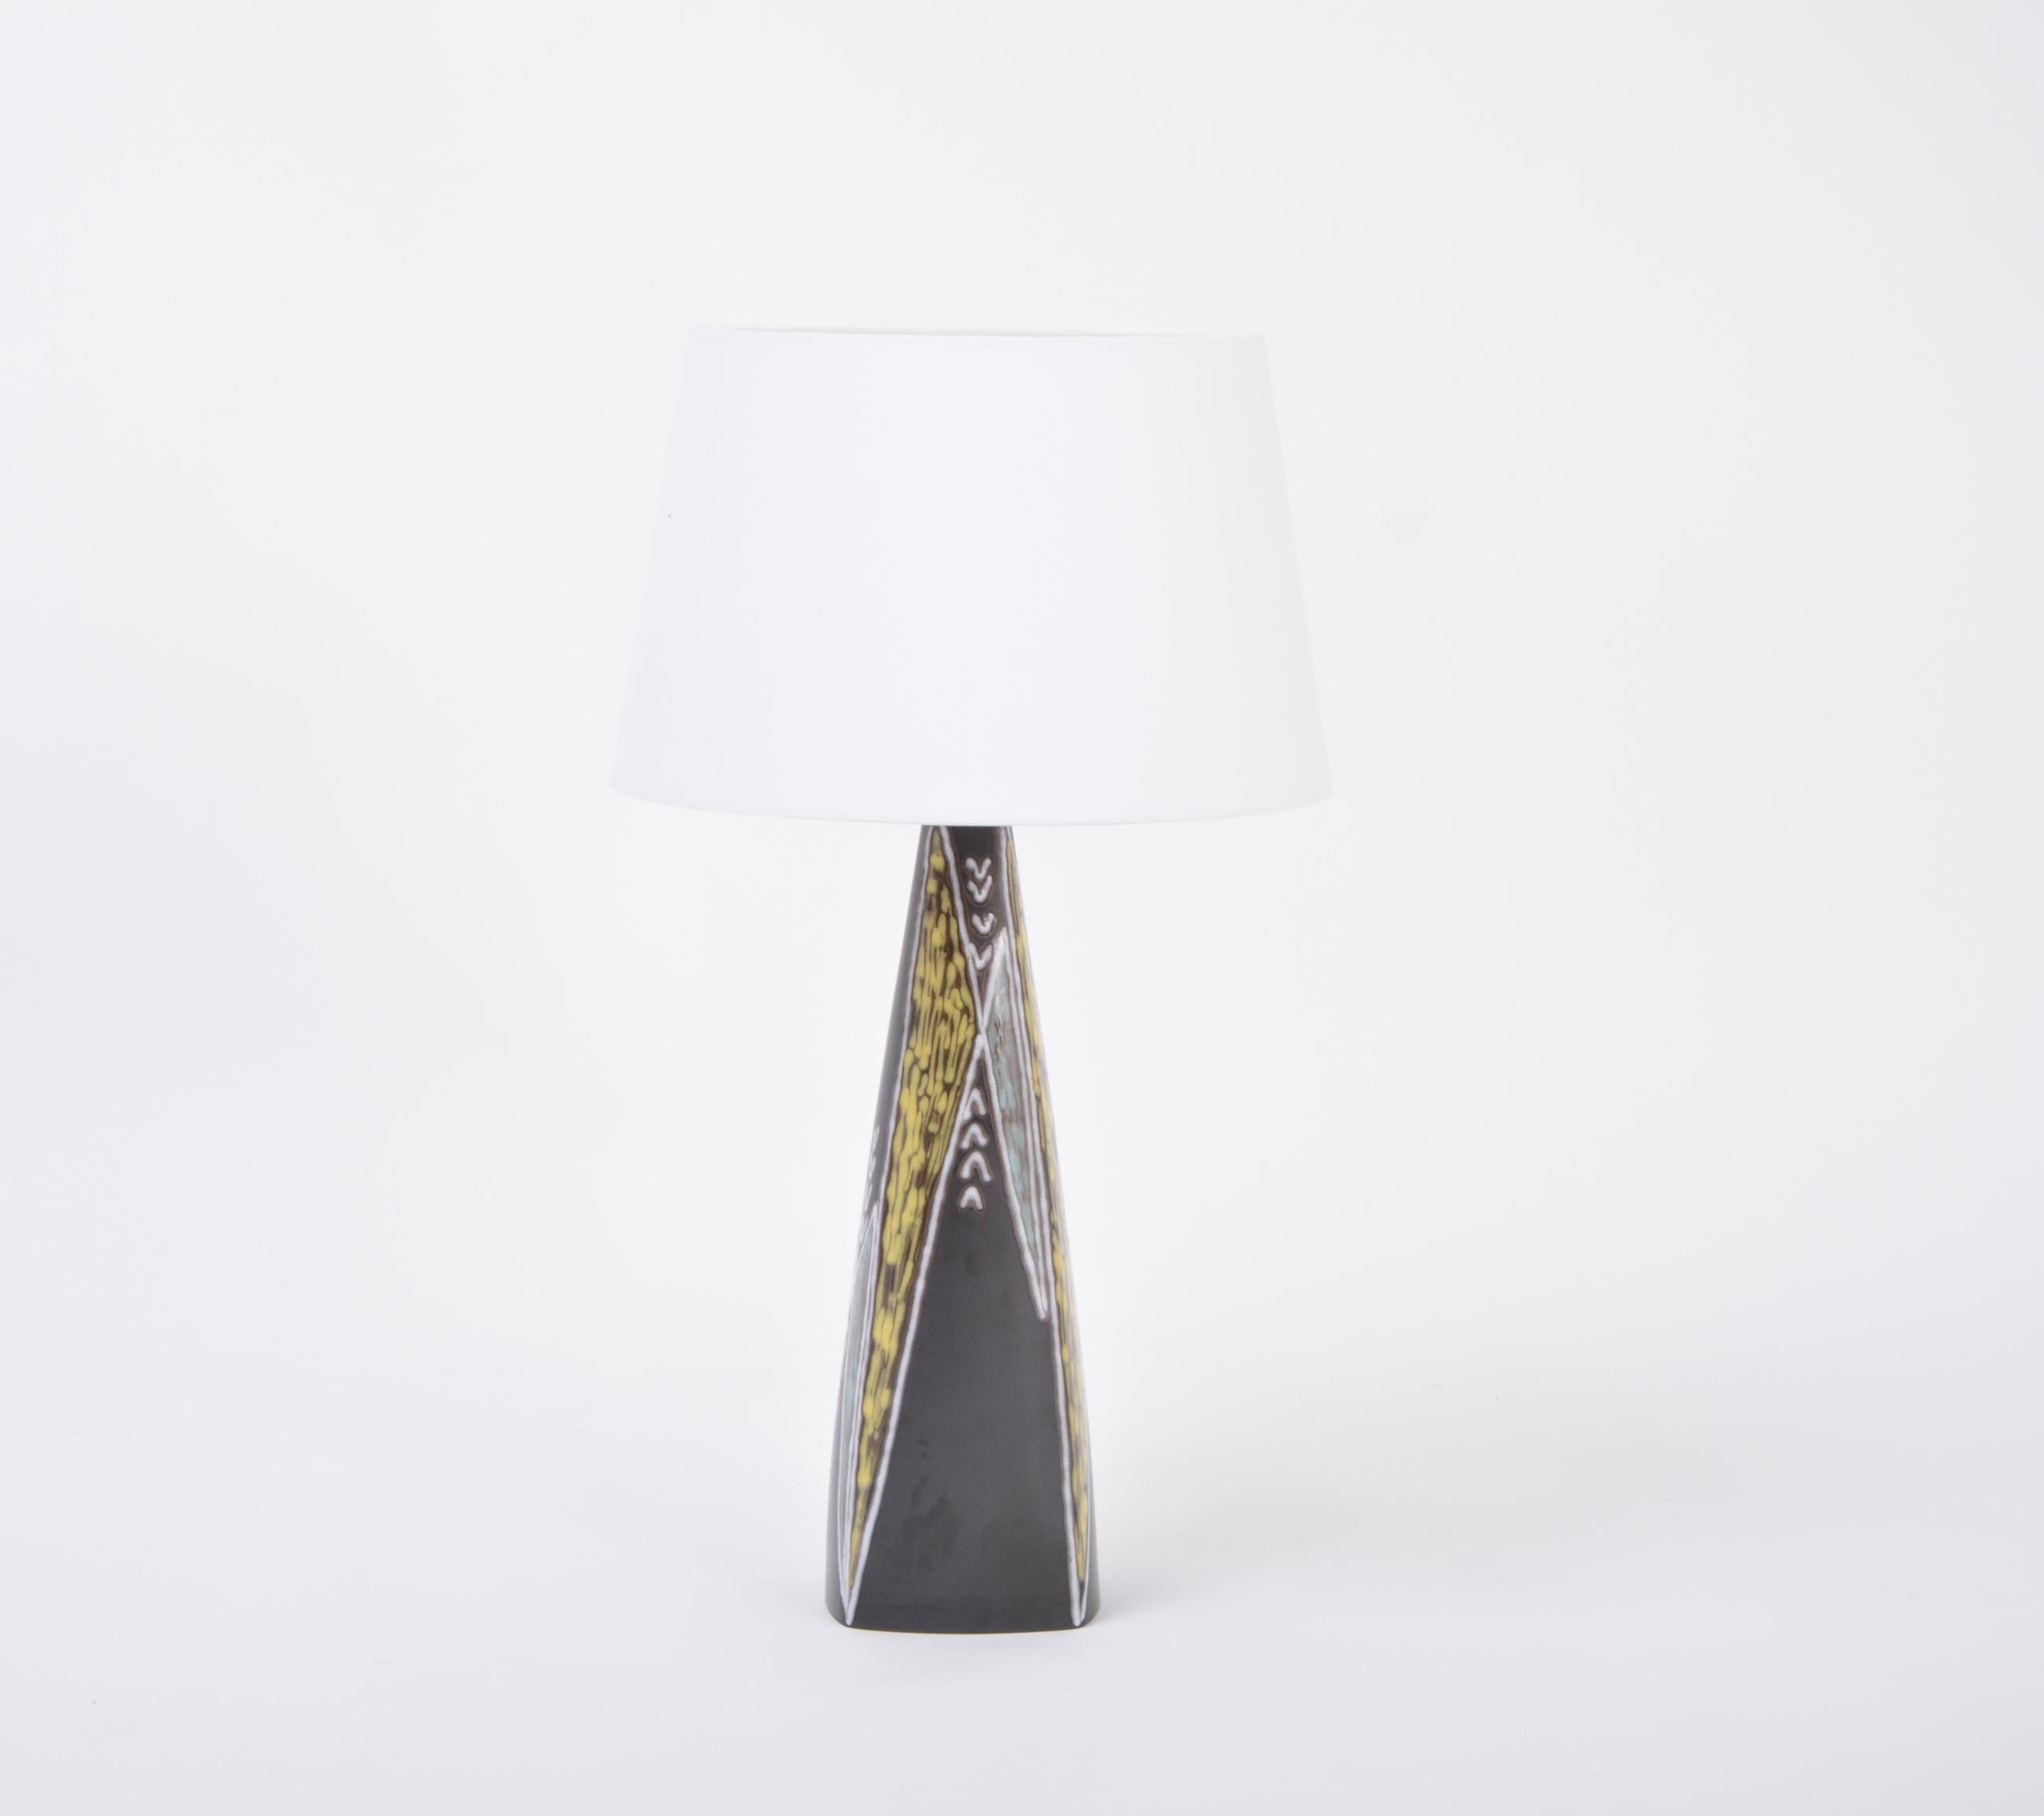 Tall Black Danish Midcentury Ceramic Table Lamp by Holm Sorensen for Søholm For Sale 2